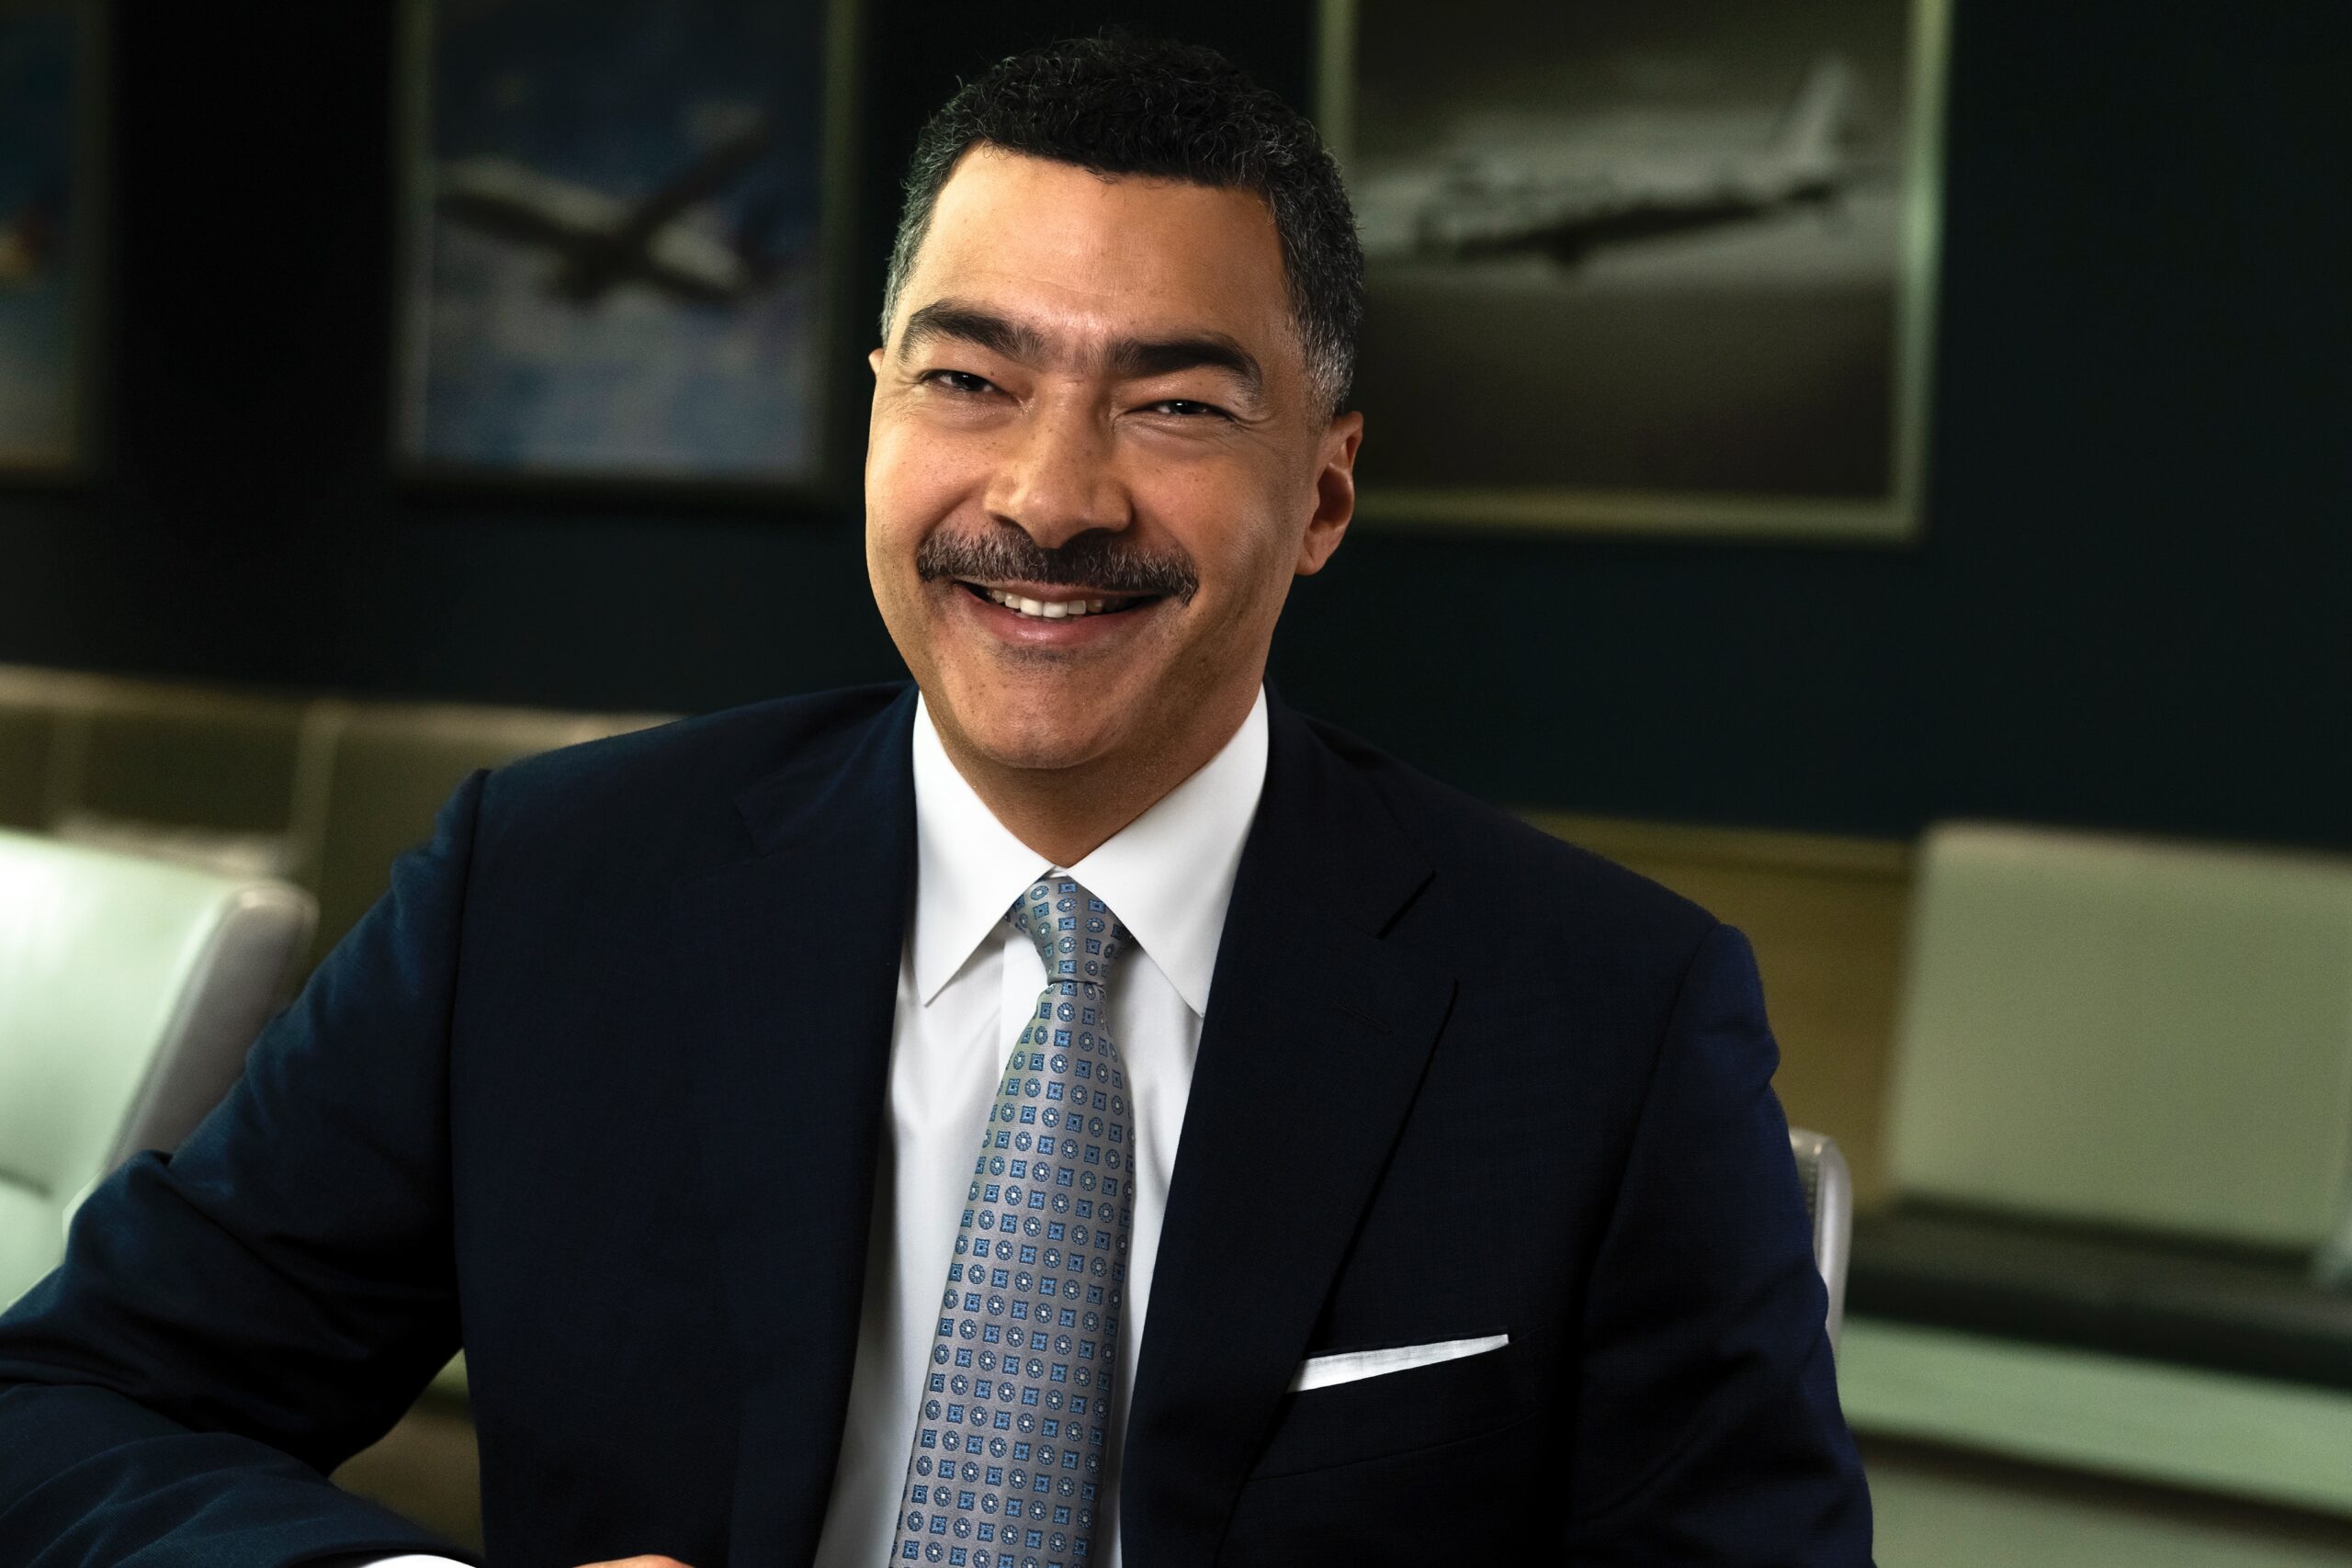 As the president of United, Brett Hart has made a deep commitment to promoting a culture of diversity, equity, and inclusion. (Image: Courtesy of United Airlines)